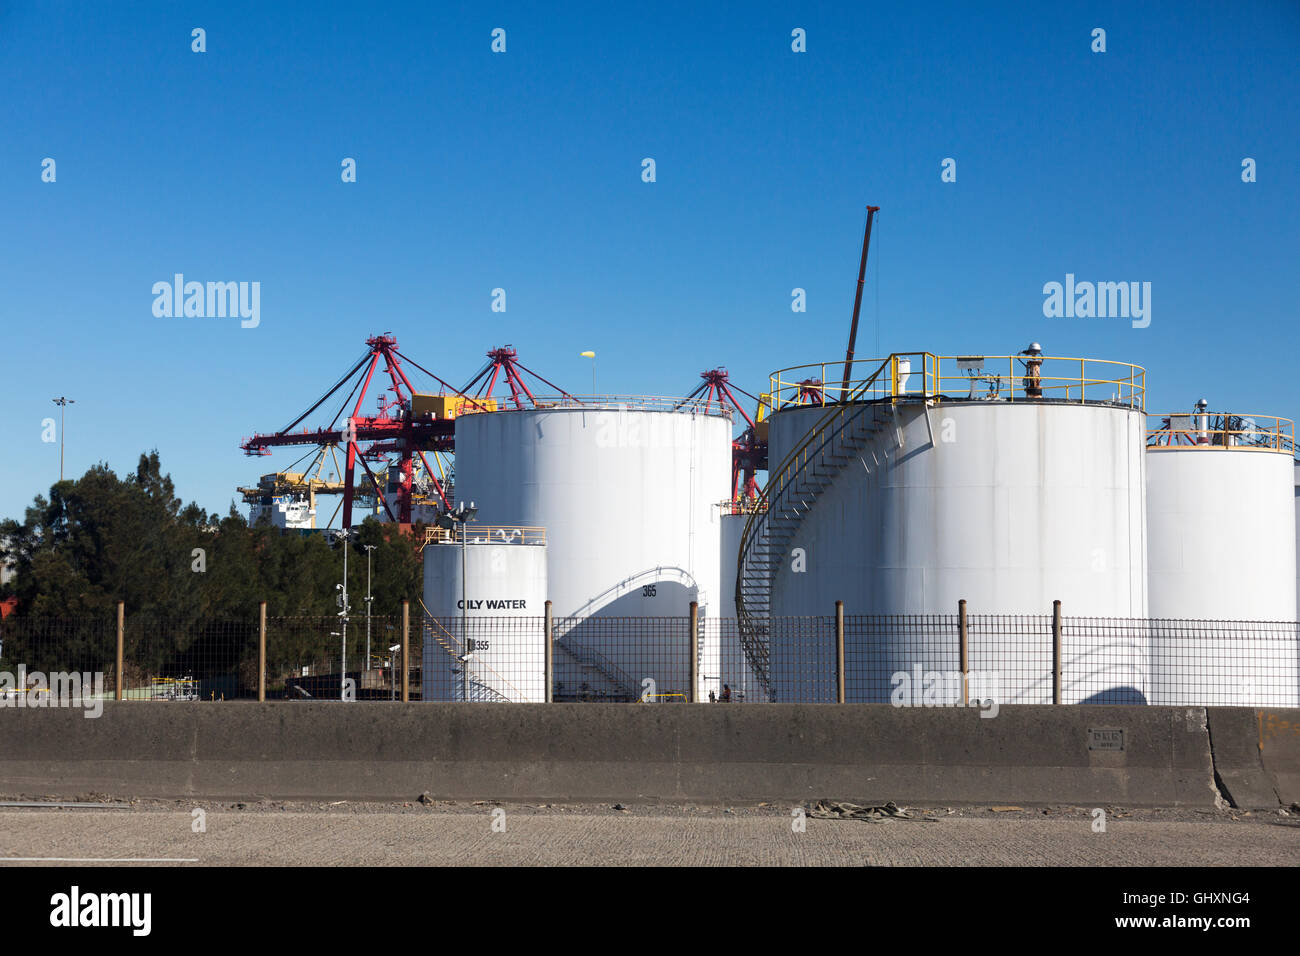 Fuel gas containers at Port Botany NSW Ports,Sydney,Australia Stock Photo